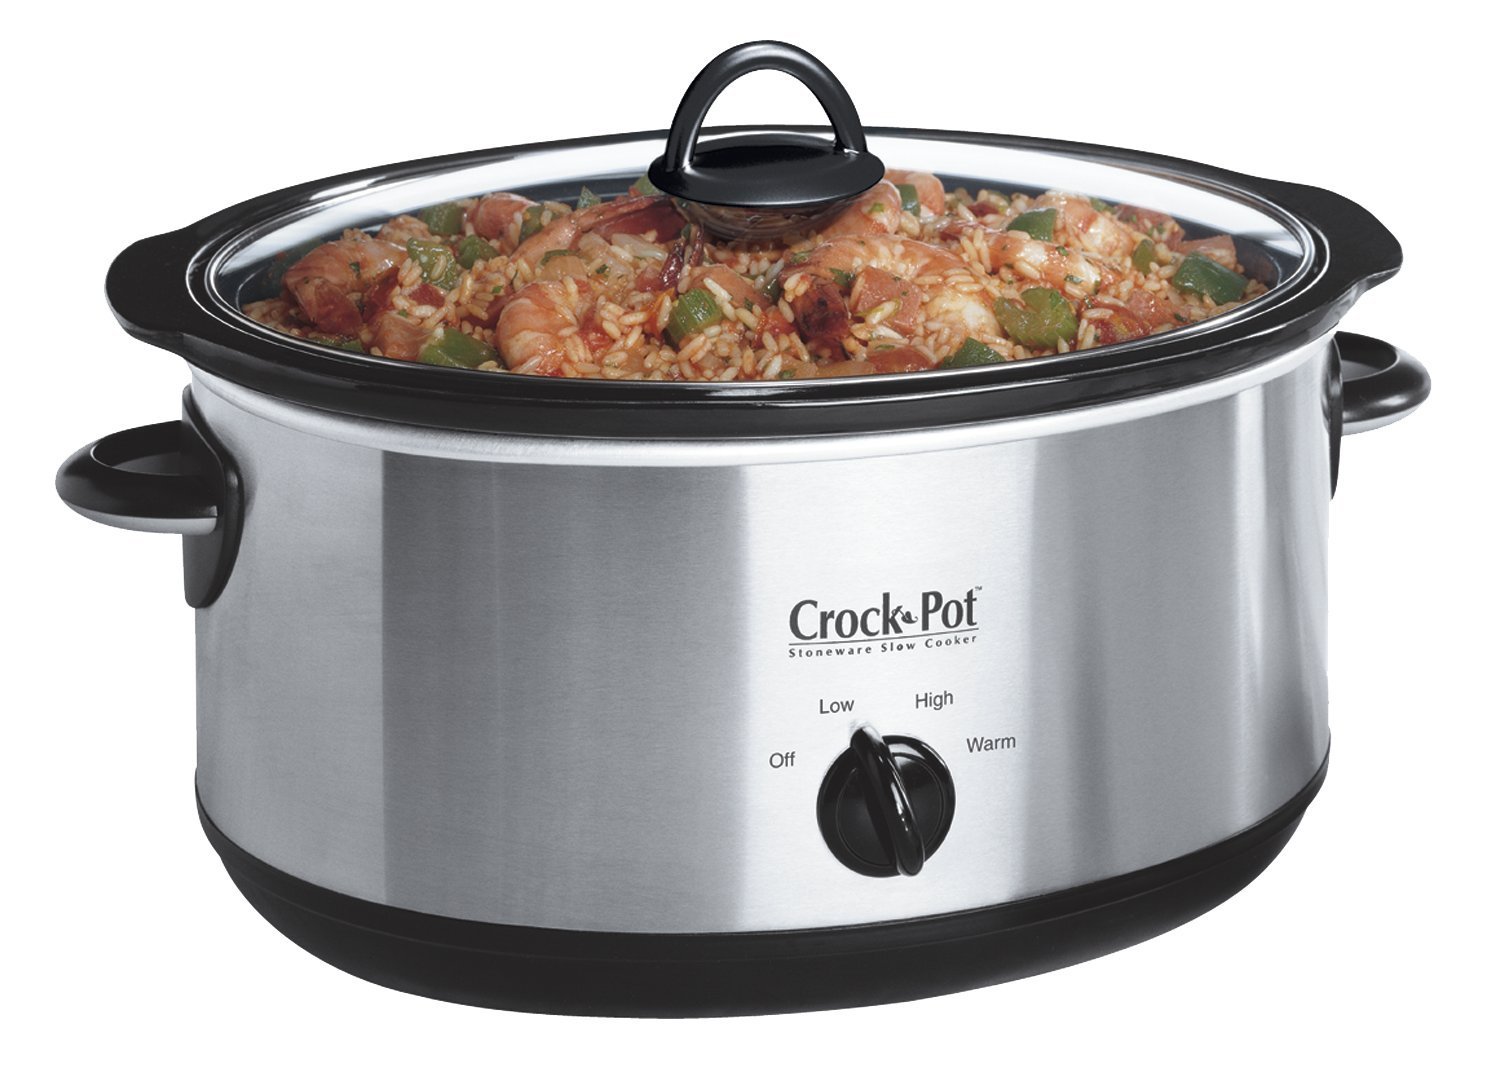  A stainless steel slow cooker or crock pot with a simple 4-settings dial - Off , Low, High and Warm 